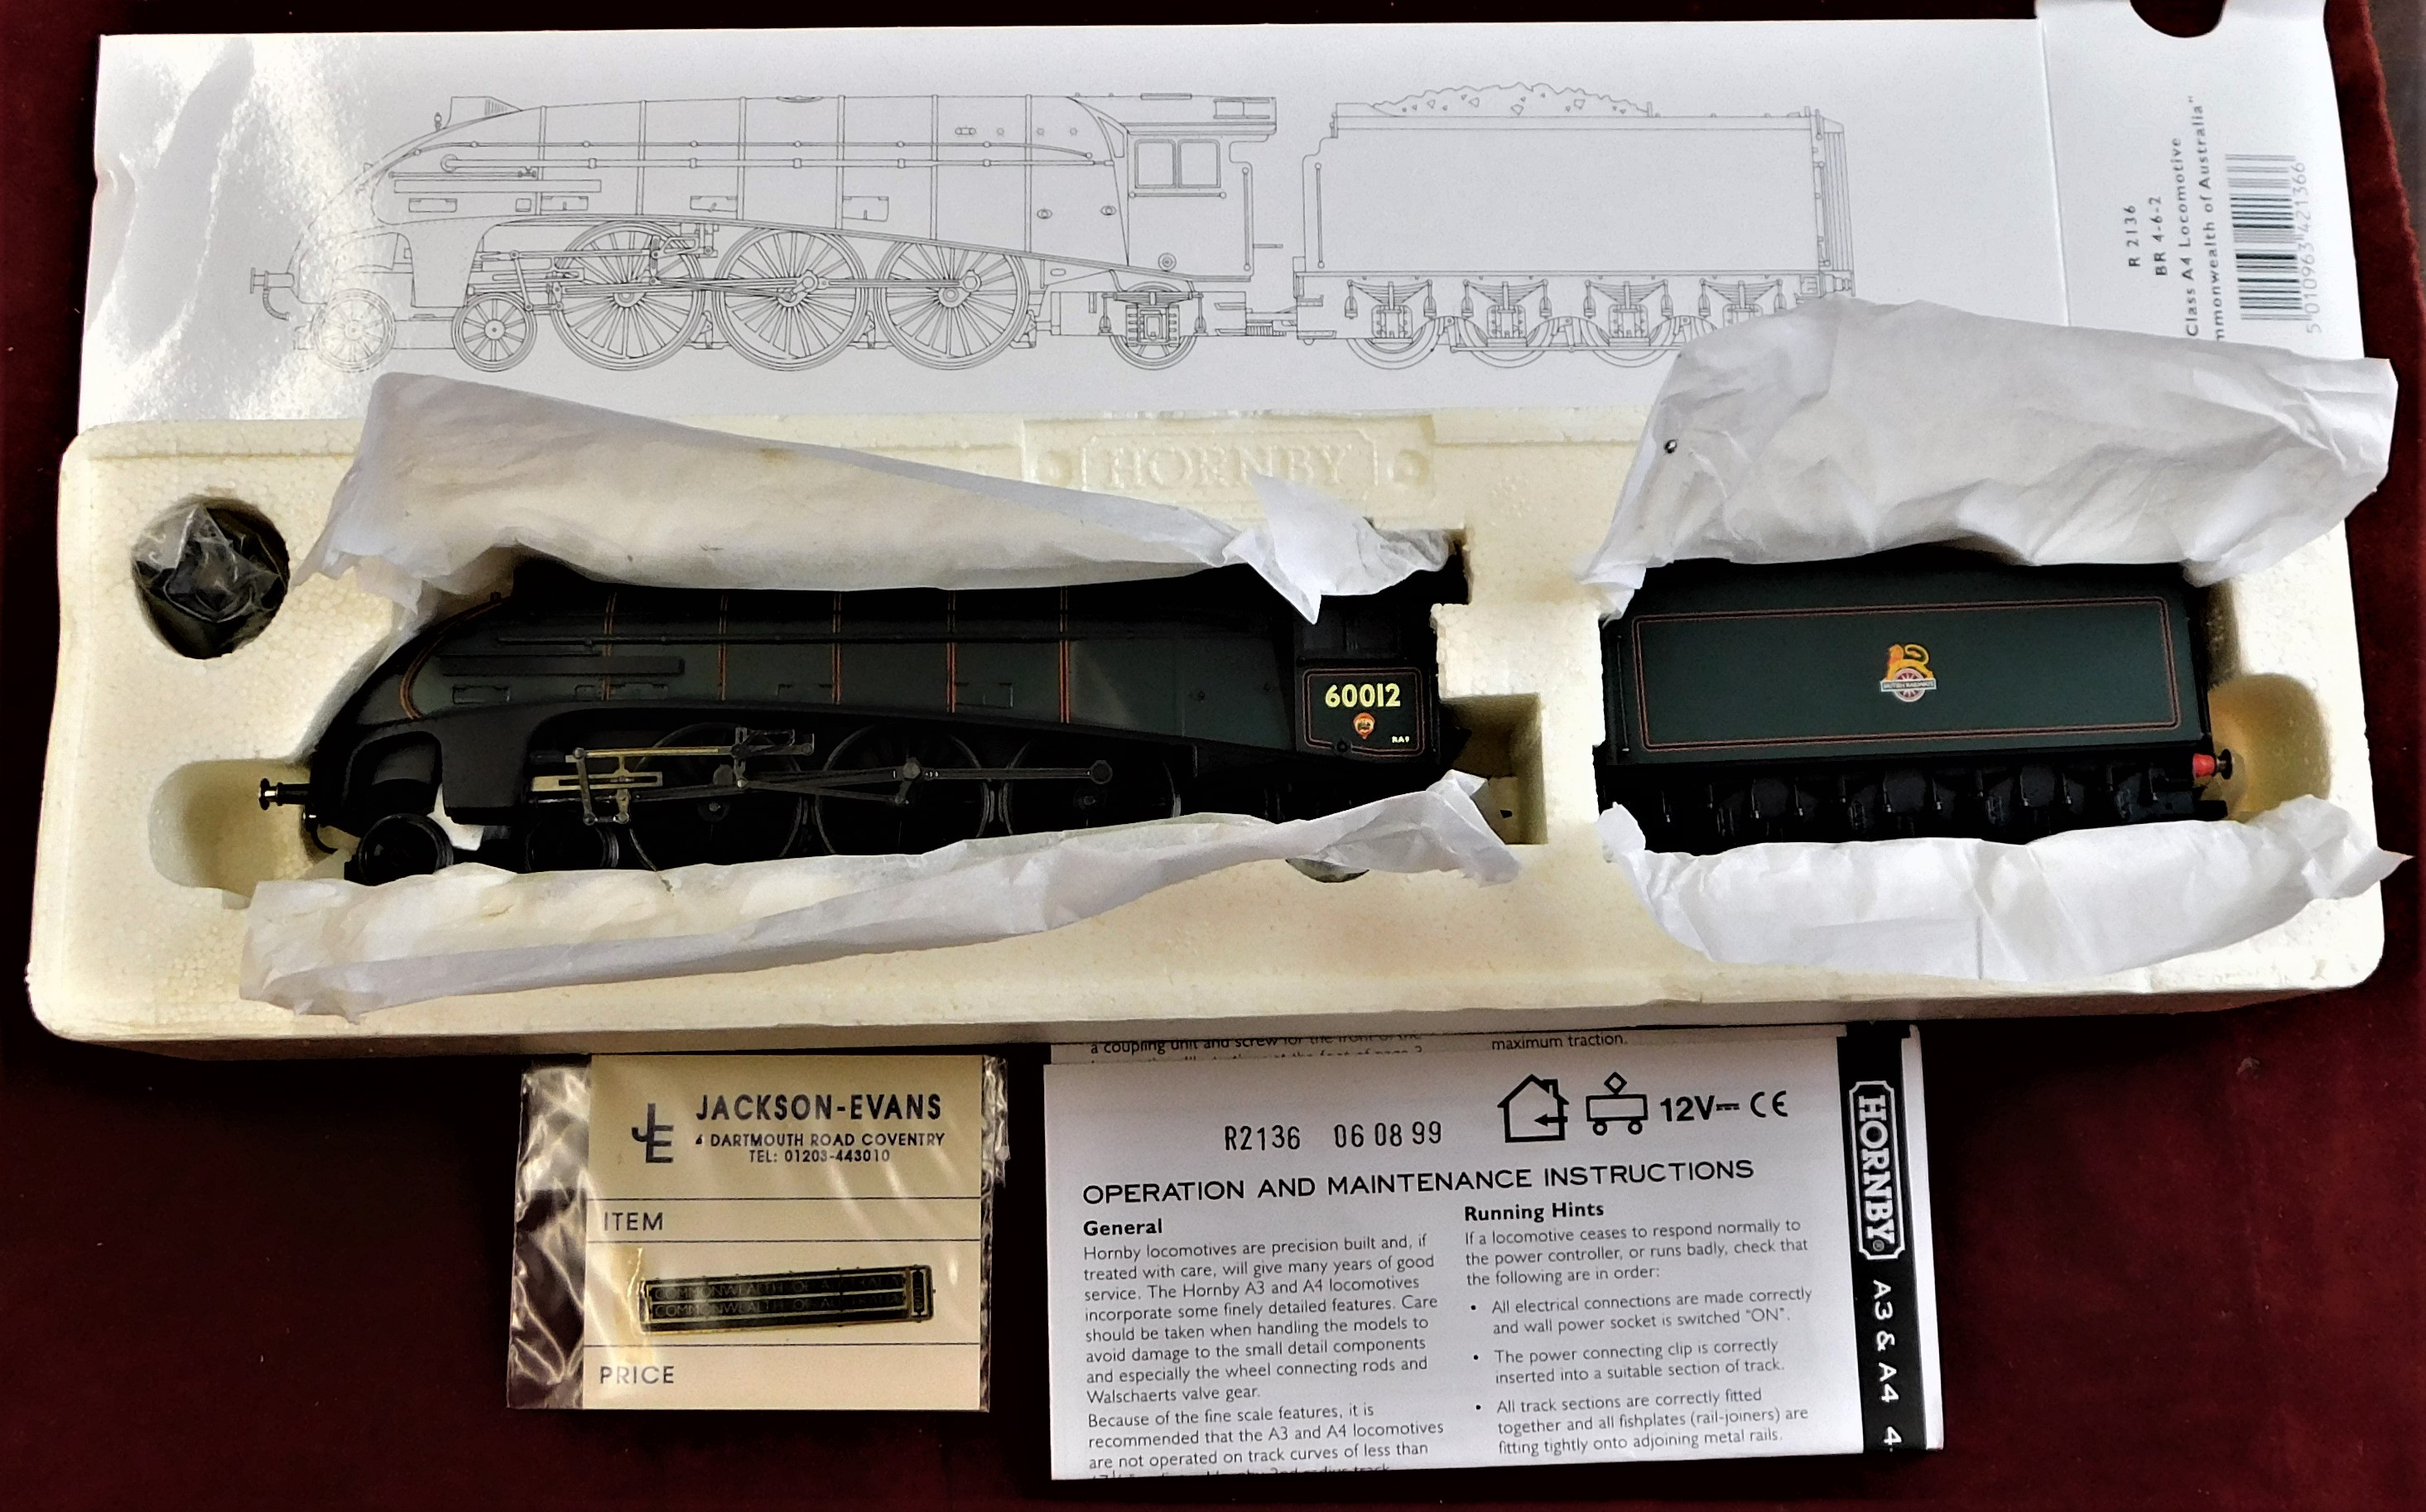 Hornby Class 4A Locomotive "Commonwealth of Australia" R2136. Mint in box.